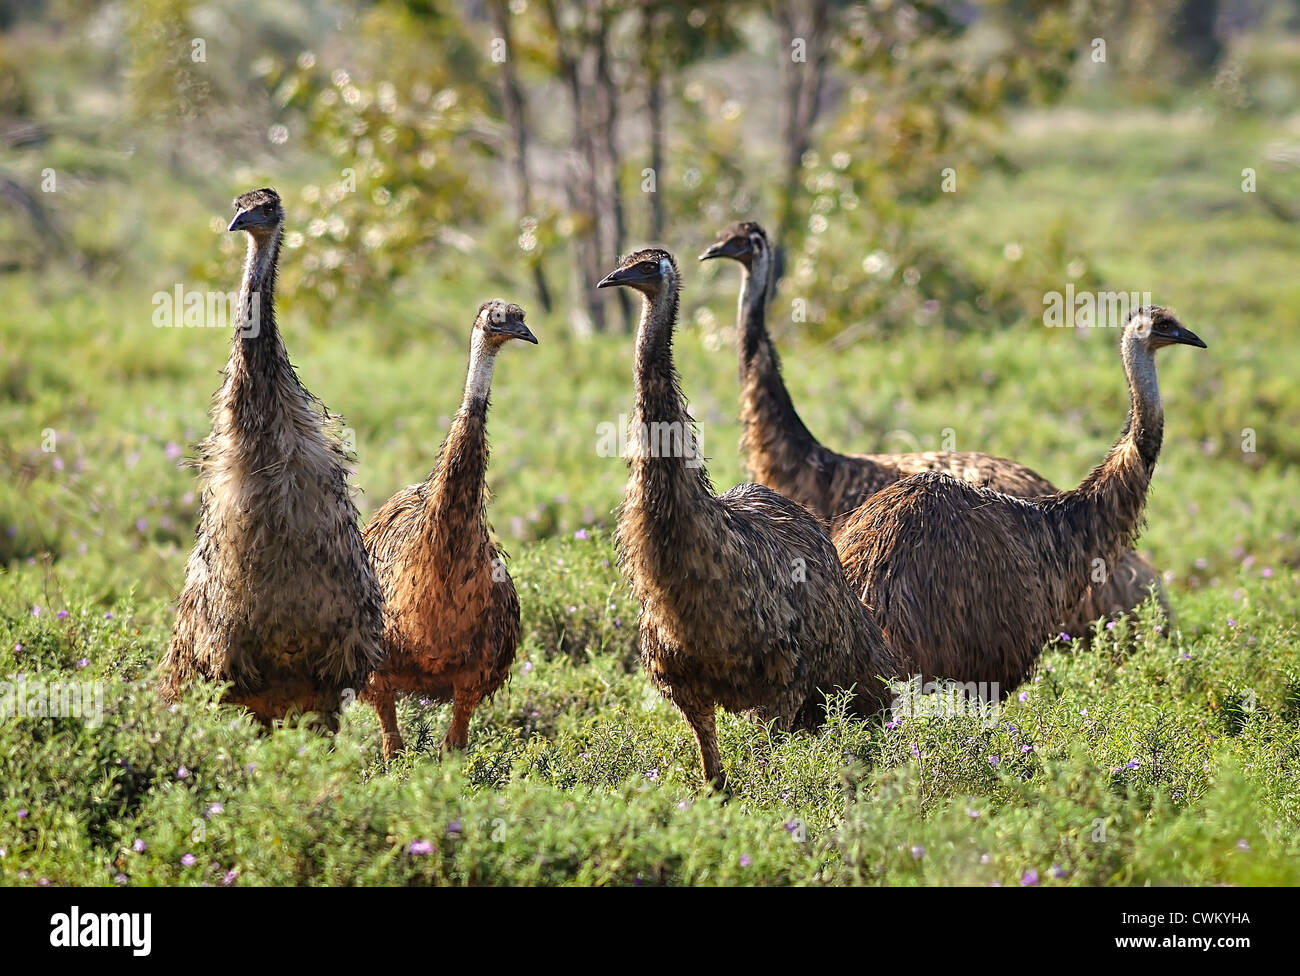 Outback Australian Animals High Resolution Stock Photography and Images -  Alamy